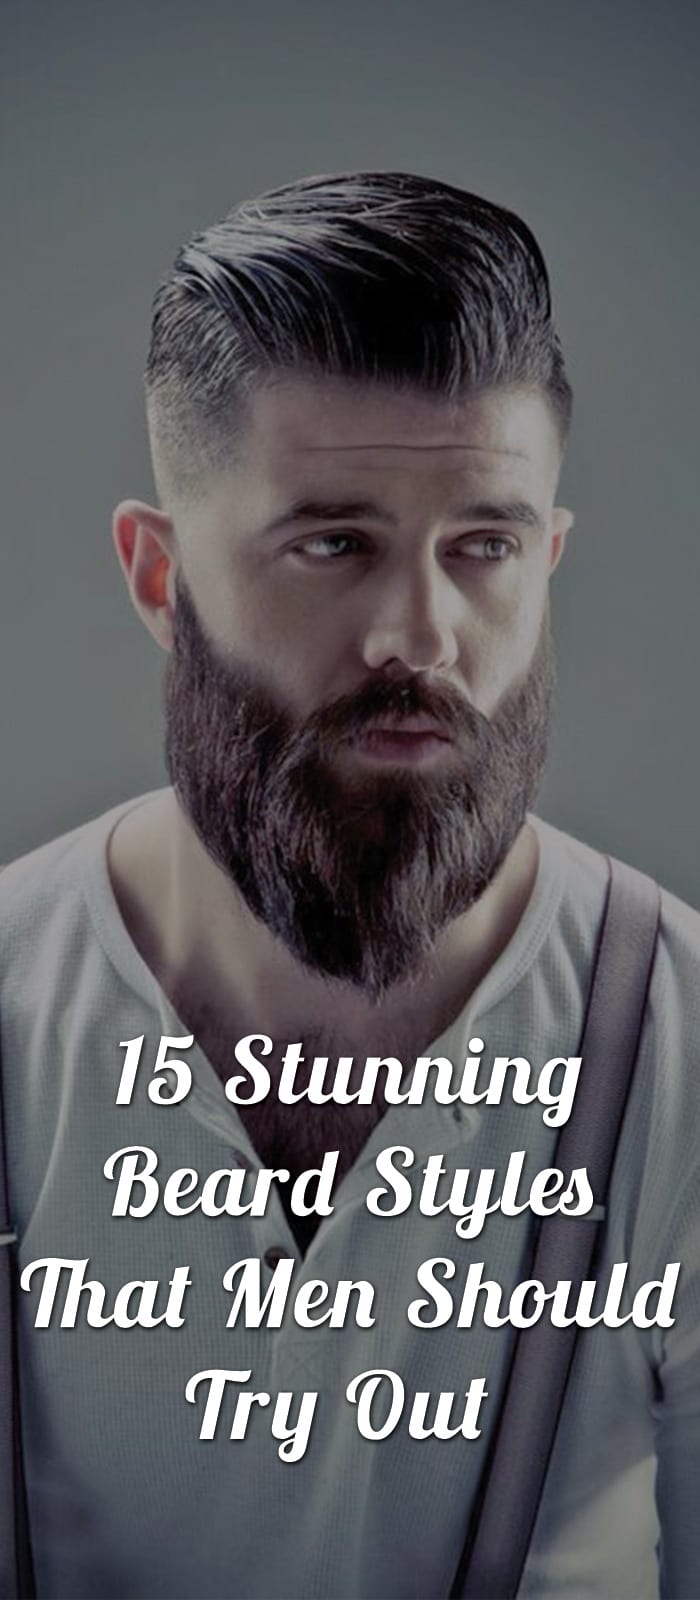 15-Stunning-Beard-Styles-That-Men-Should-Try-Out